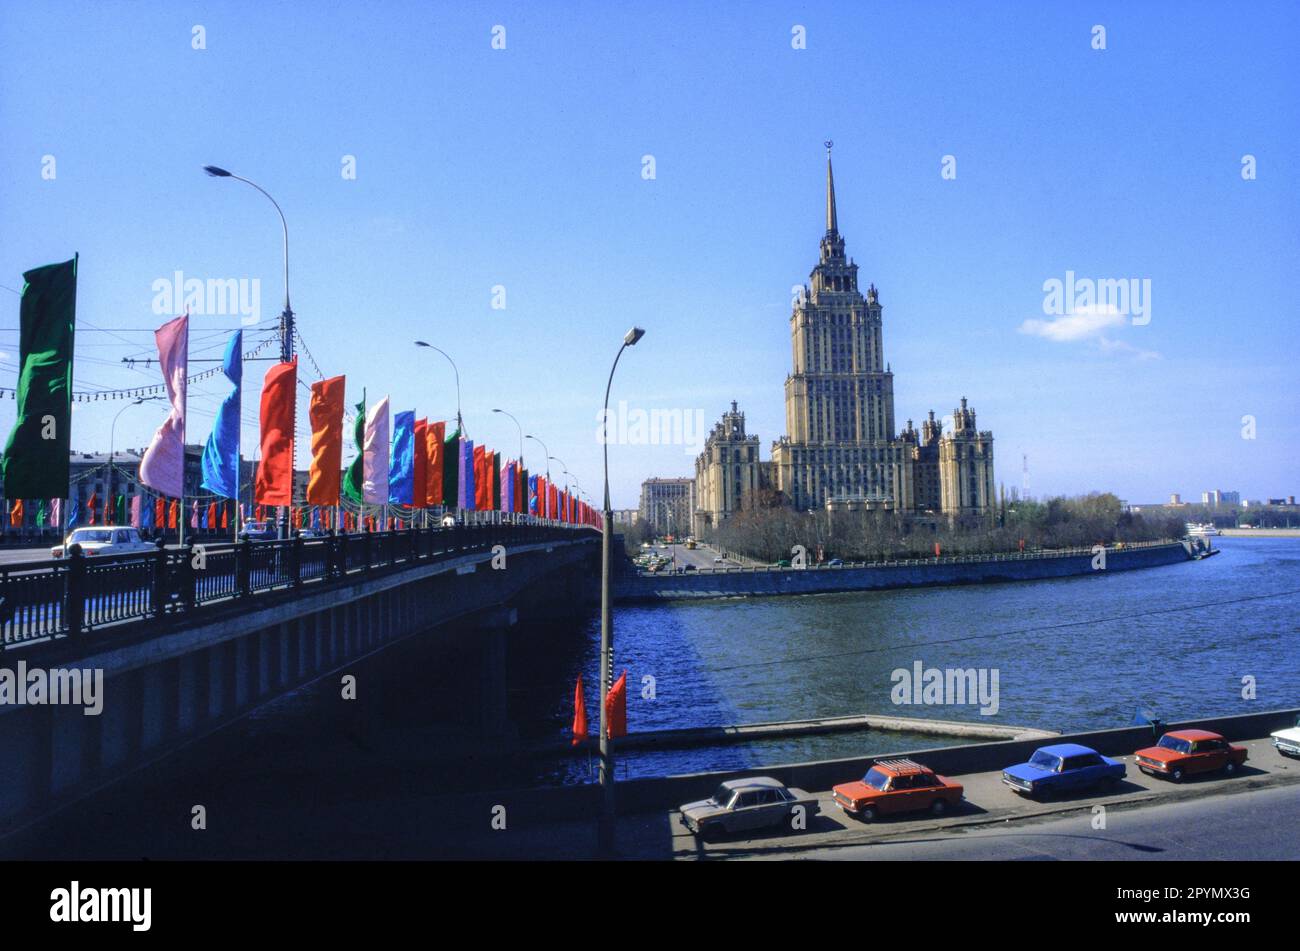 1988: Flags fly on the Kutuzovsky Bridge over the Moskva River in front of the Hotel Ukraina in preparation for the May Day celebrations. The Baroque 'wedding cake' style building is one of the so-called 'Seven Sisters' commissioned by Joseph Stalin as part of a plan to modernize Moscow immediately following World War II. Construction began in 1953 and the Hotel Ukraina opened in 1957. Stock Photo